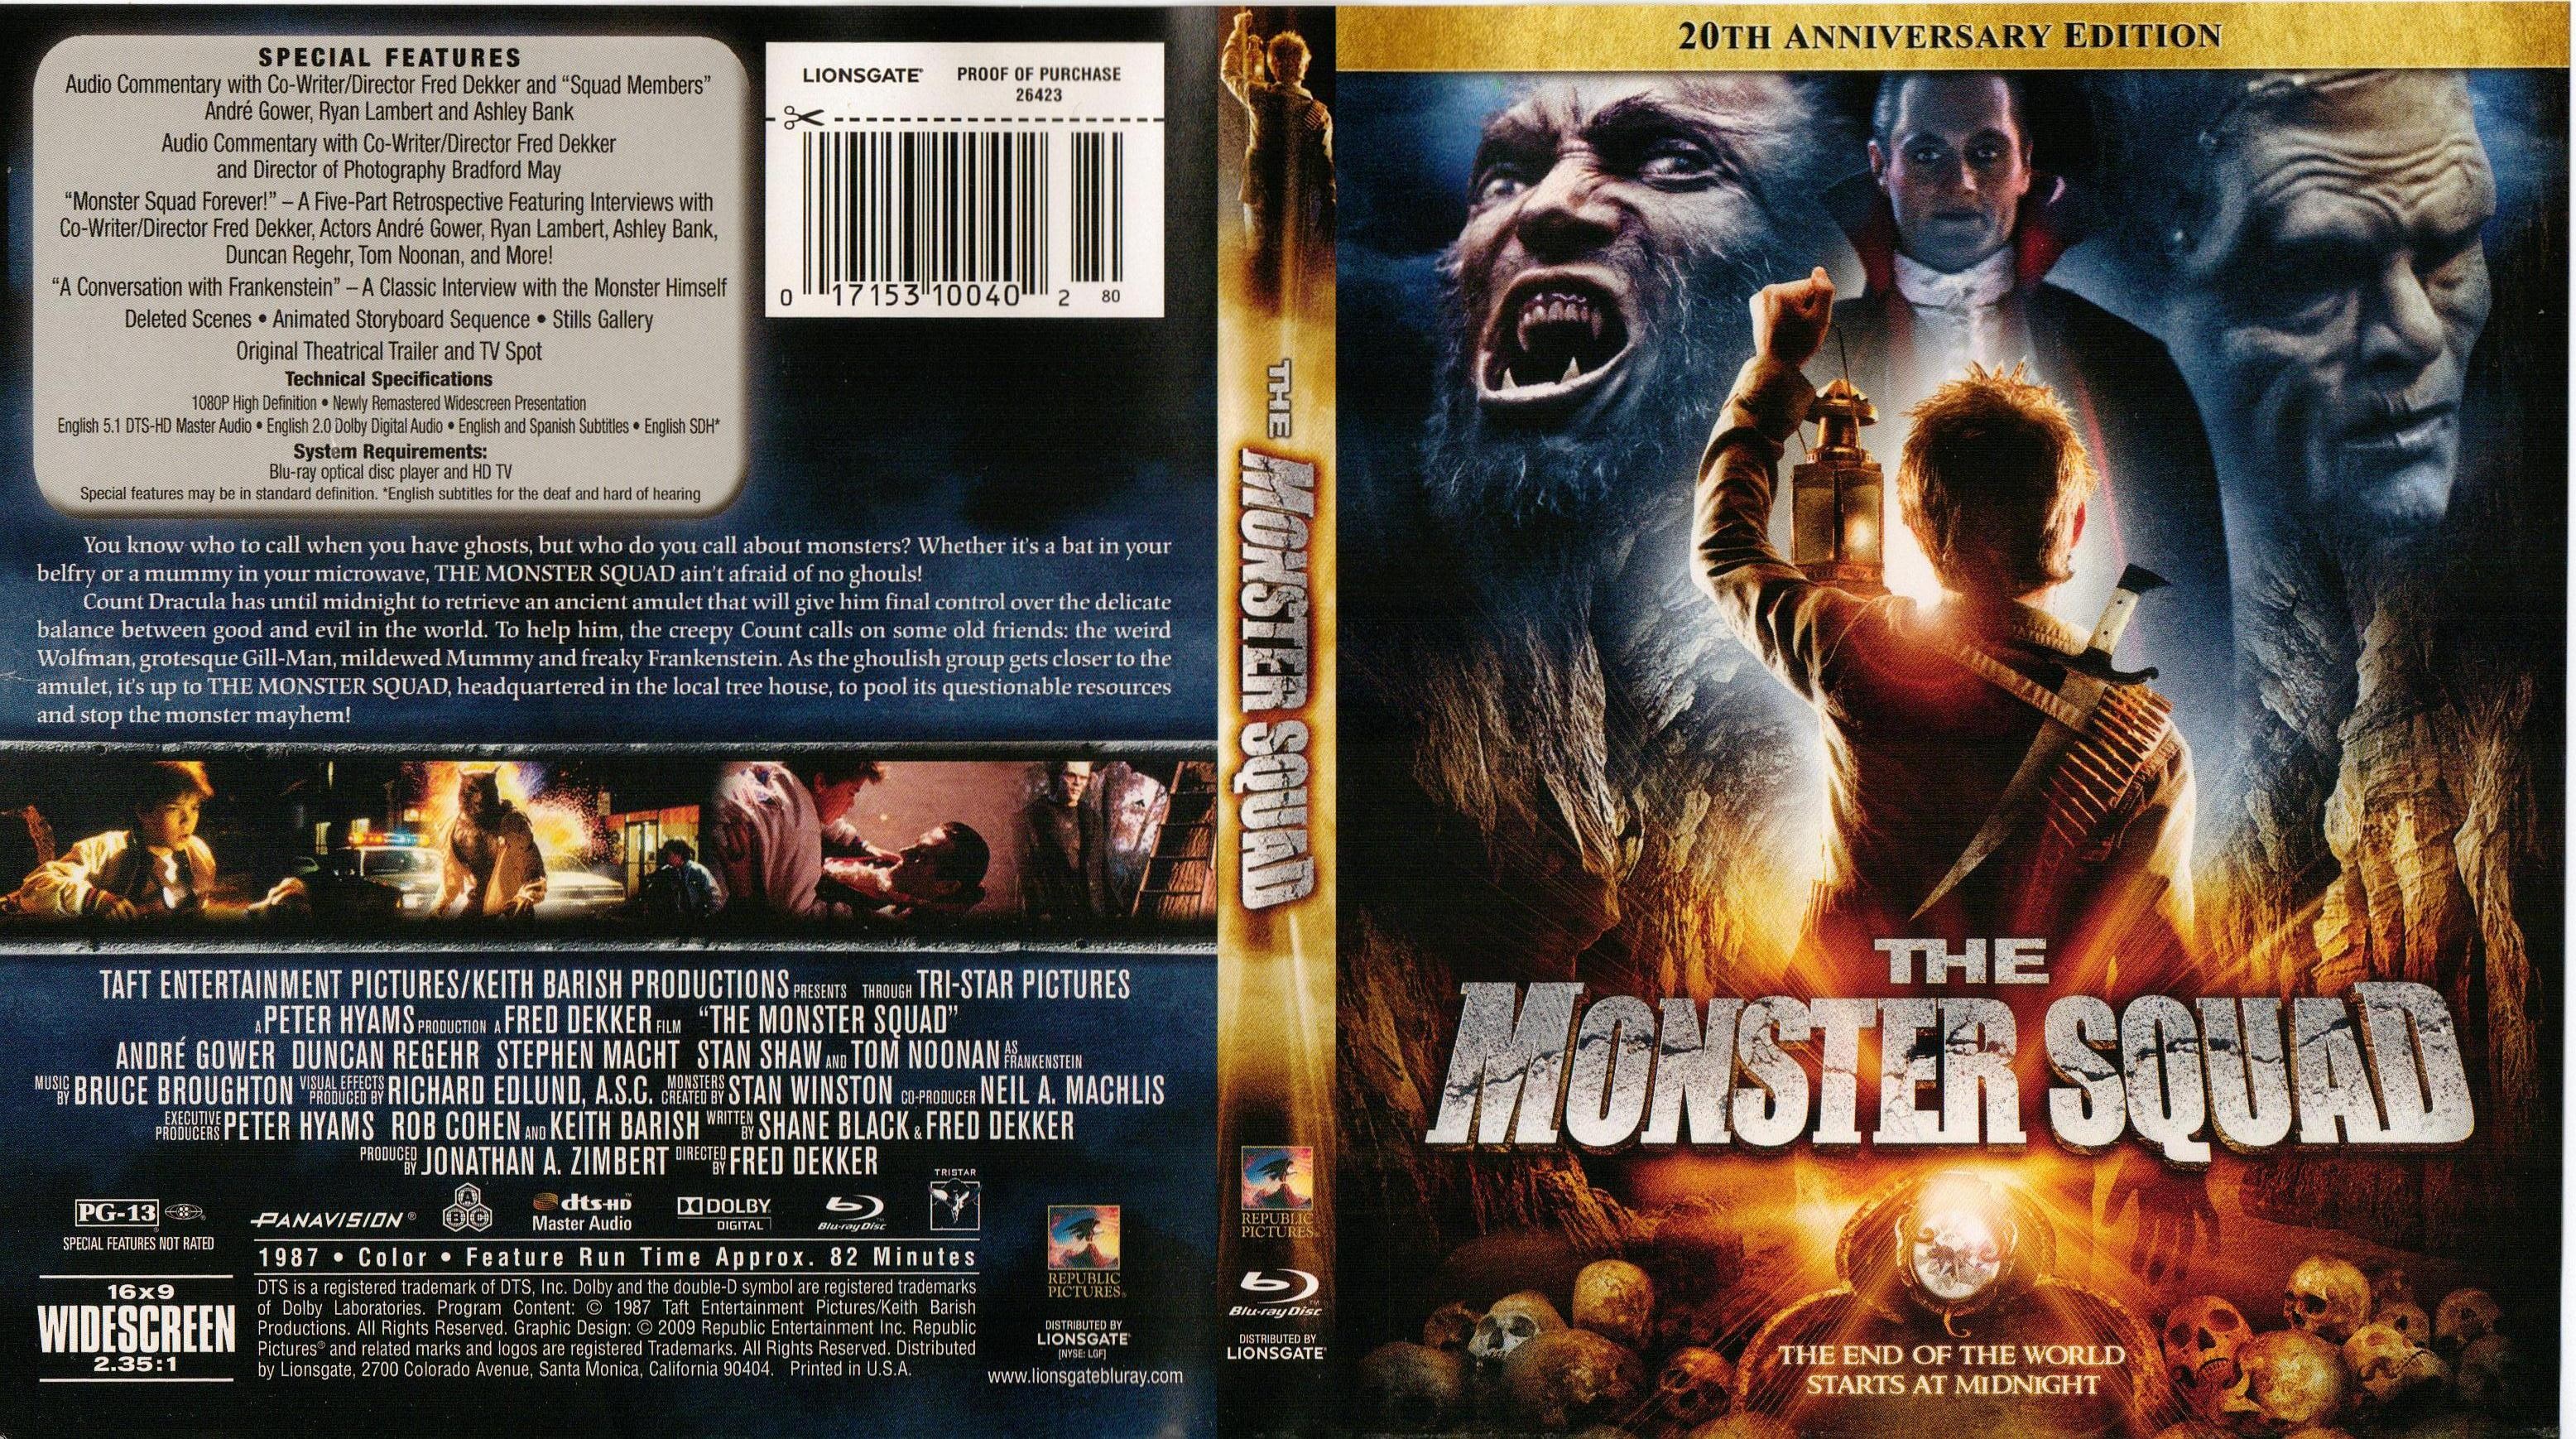 Jaquette DVD The Monster Squad Zone 1 (BLU-RAY)